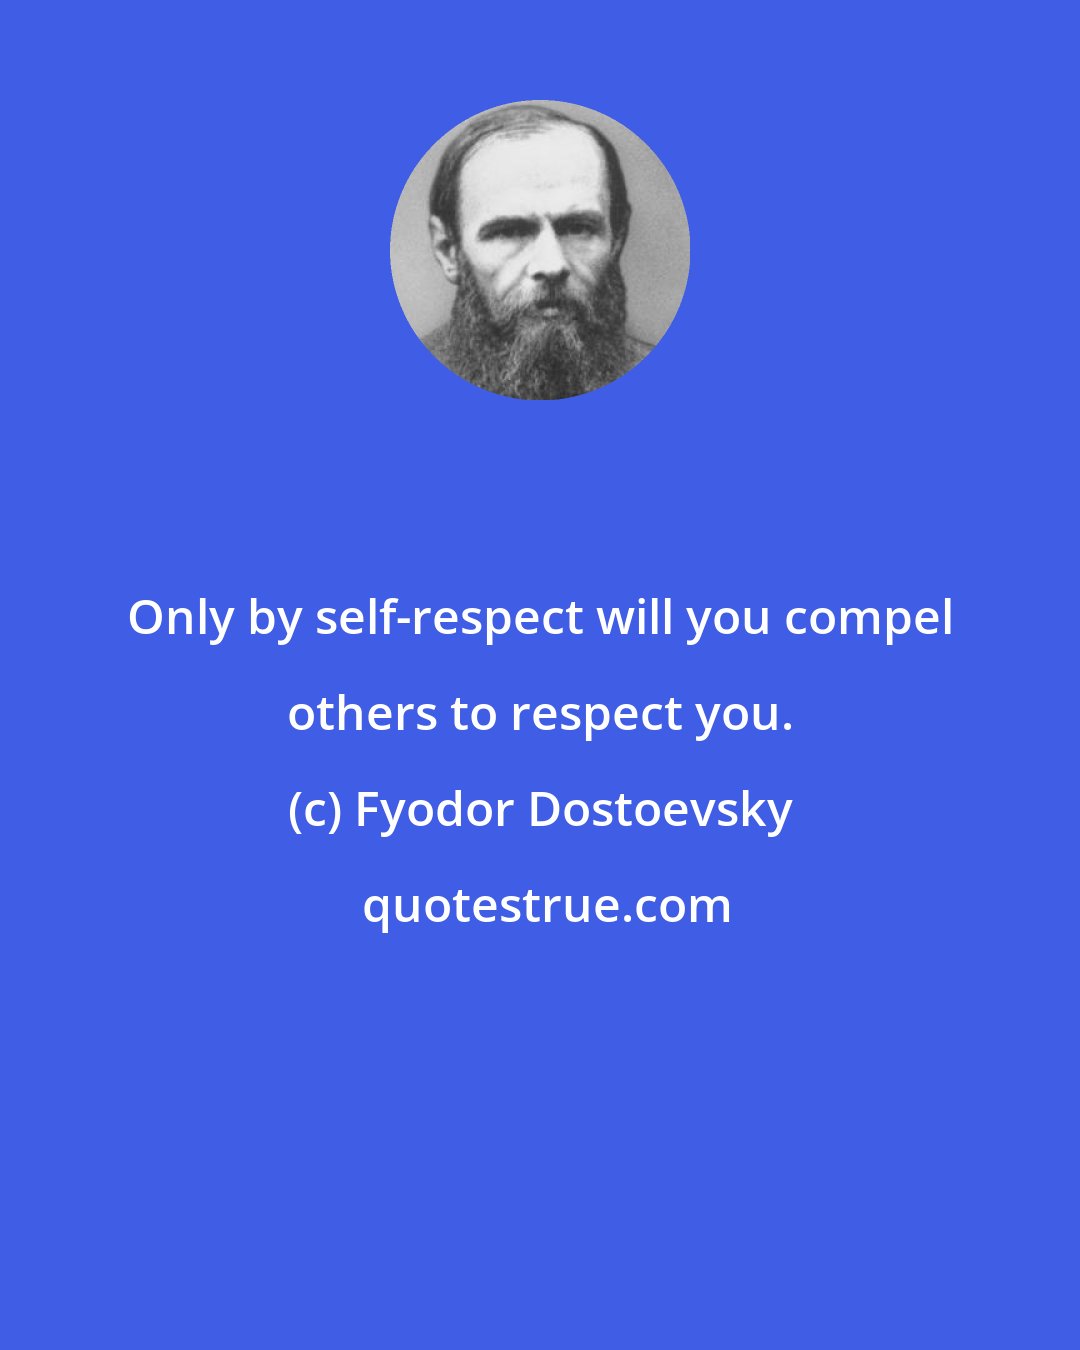 Fyodor Dostoevsky: Only by self-respect will you compel others to respect you.